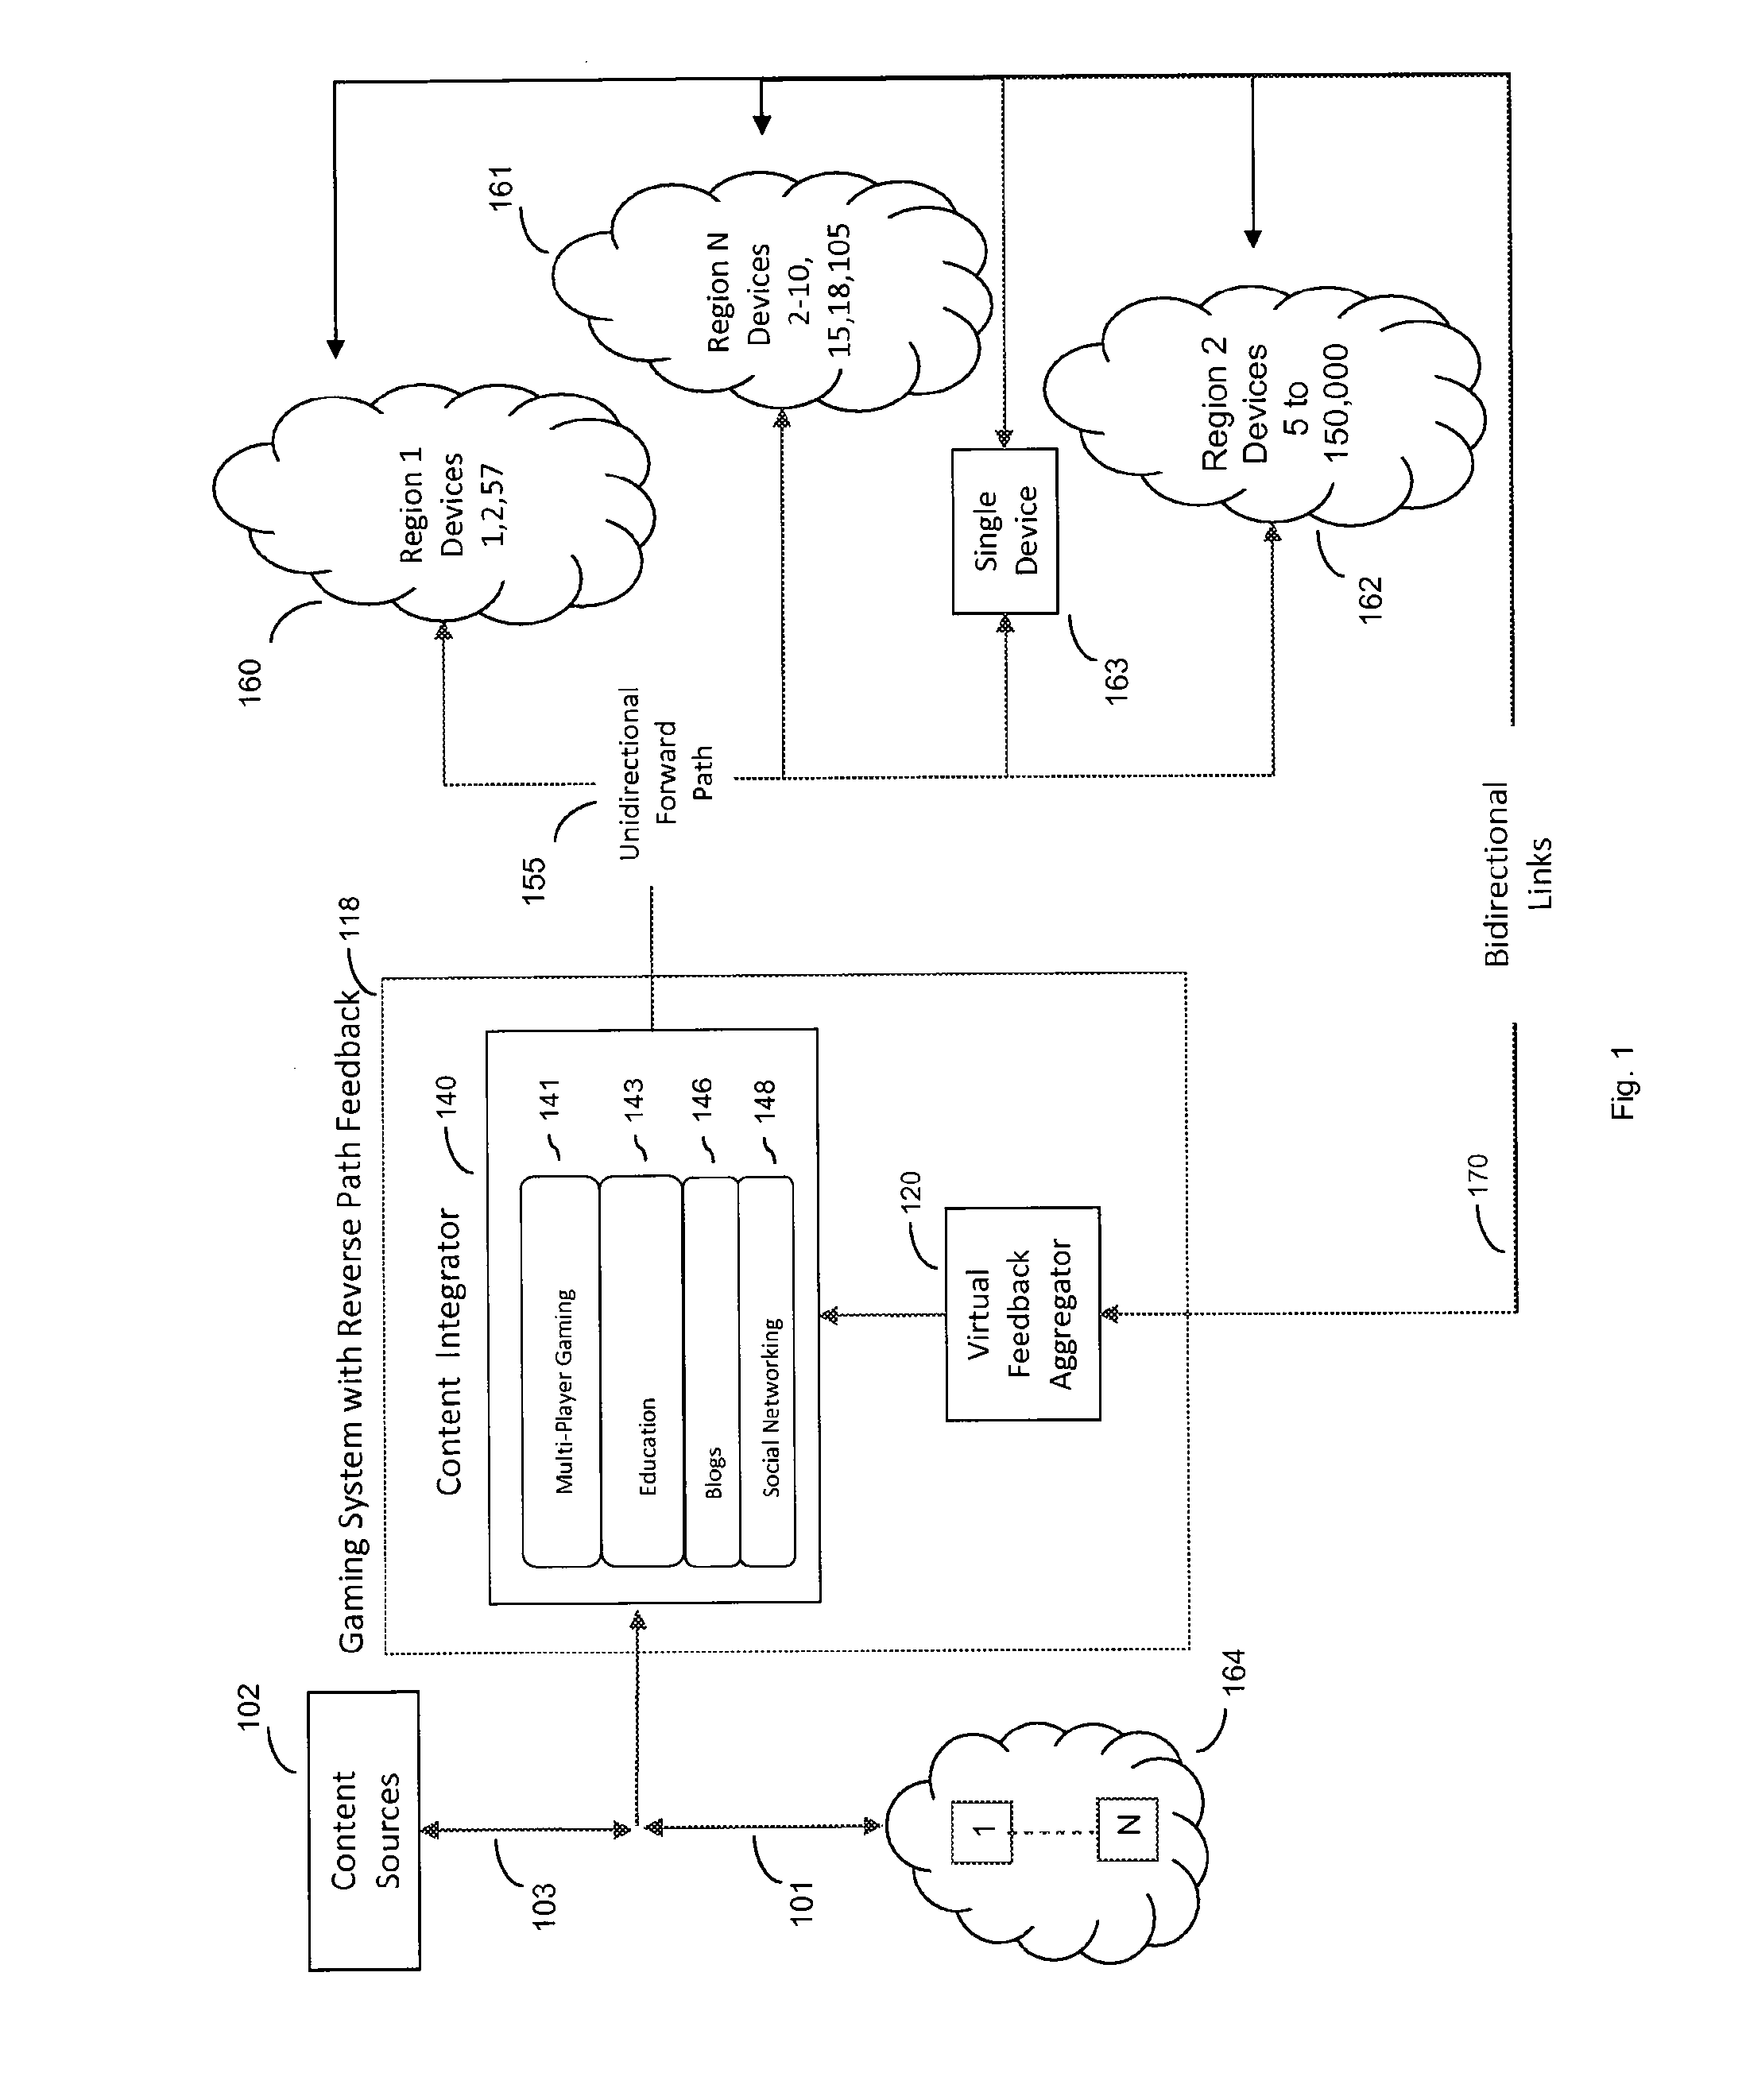 Gaming system with end user feedback for a communication network having a multi-media management